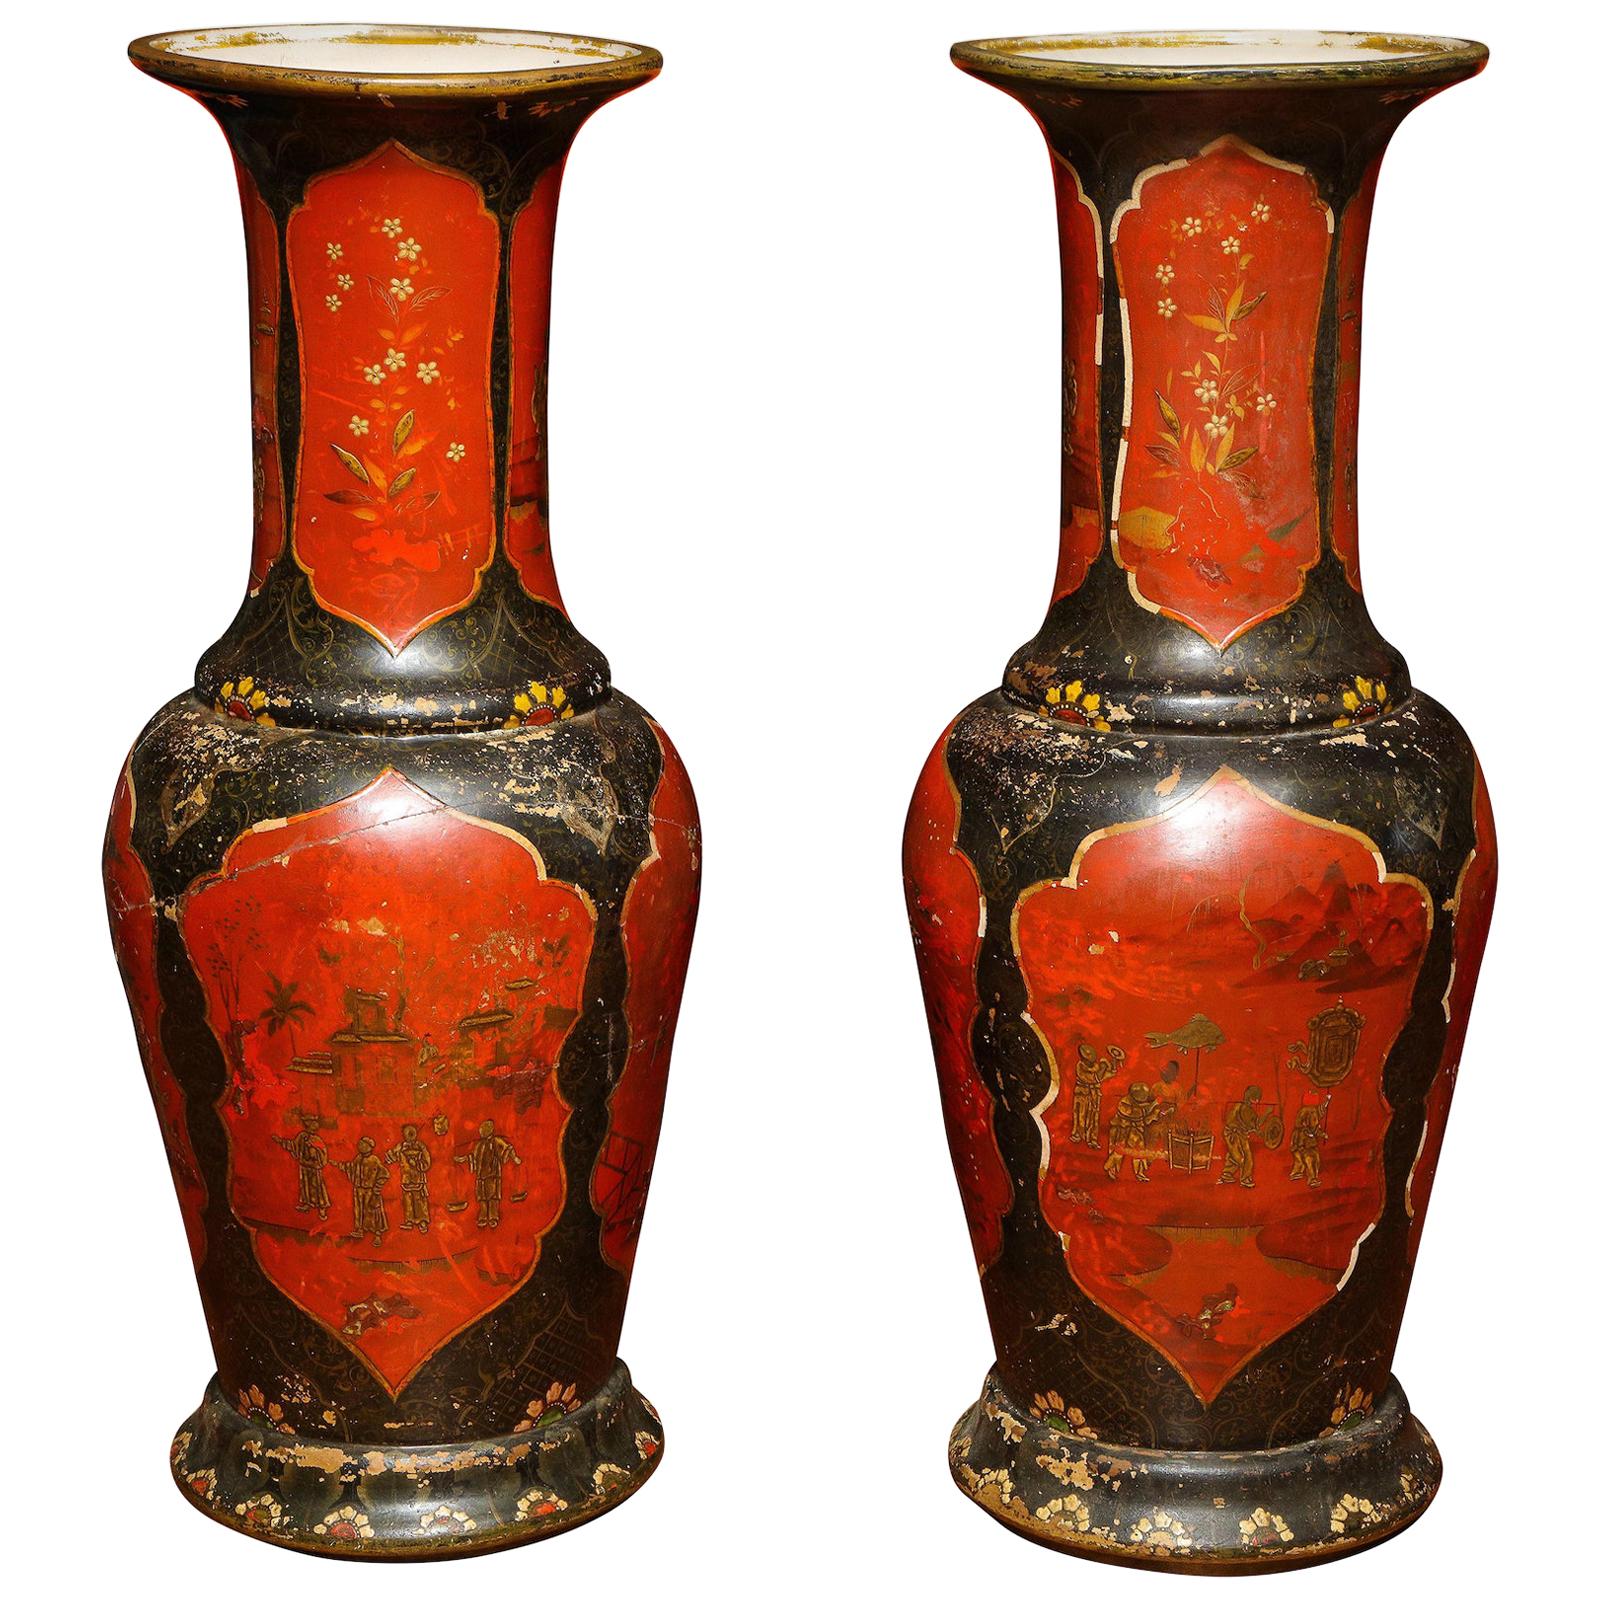 Monumental Pair of Berlin Faience Red and Black-Lacquered Vases